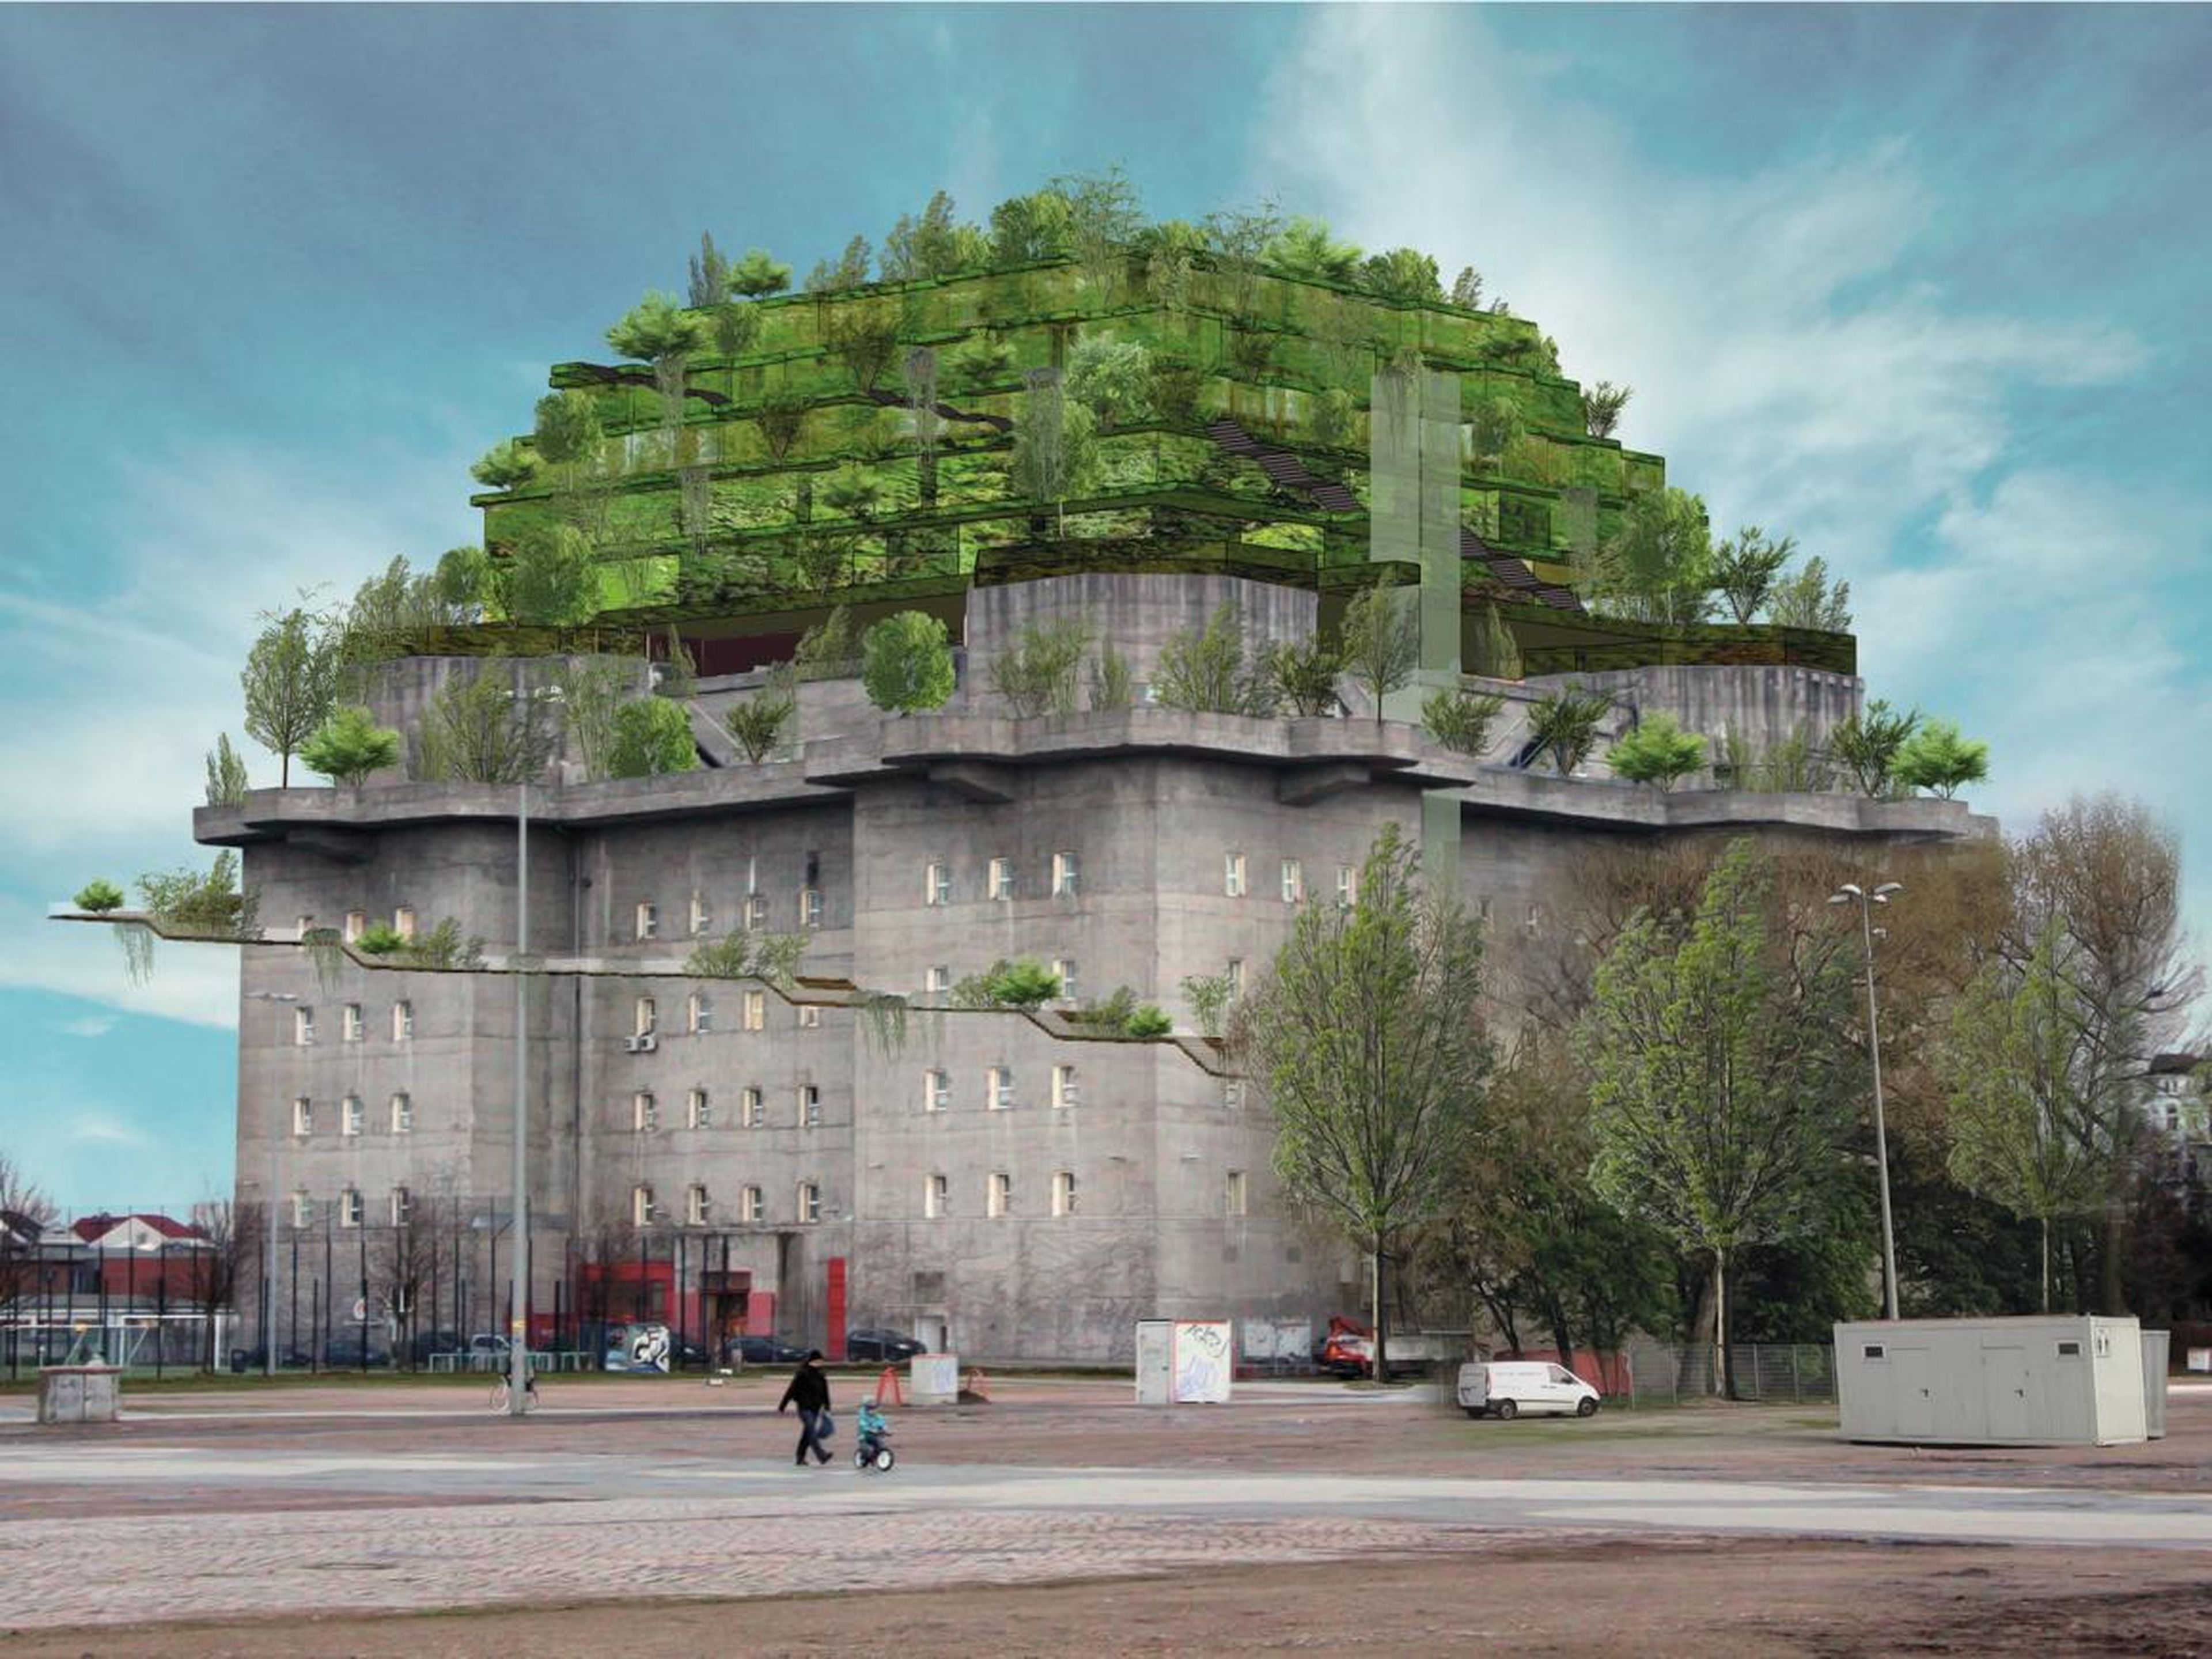 A former Nazi bunker in Germany is being turned into an upscale hotel with a 5-storey roof garden